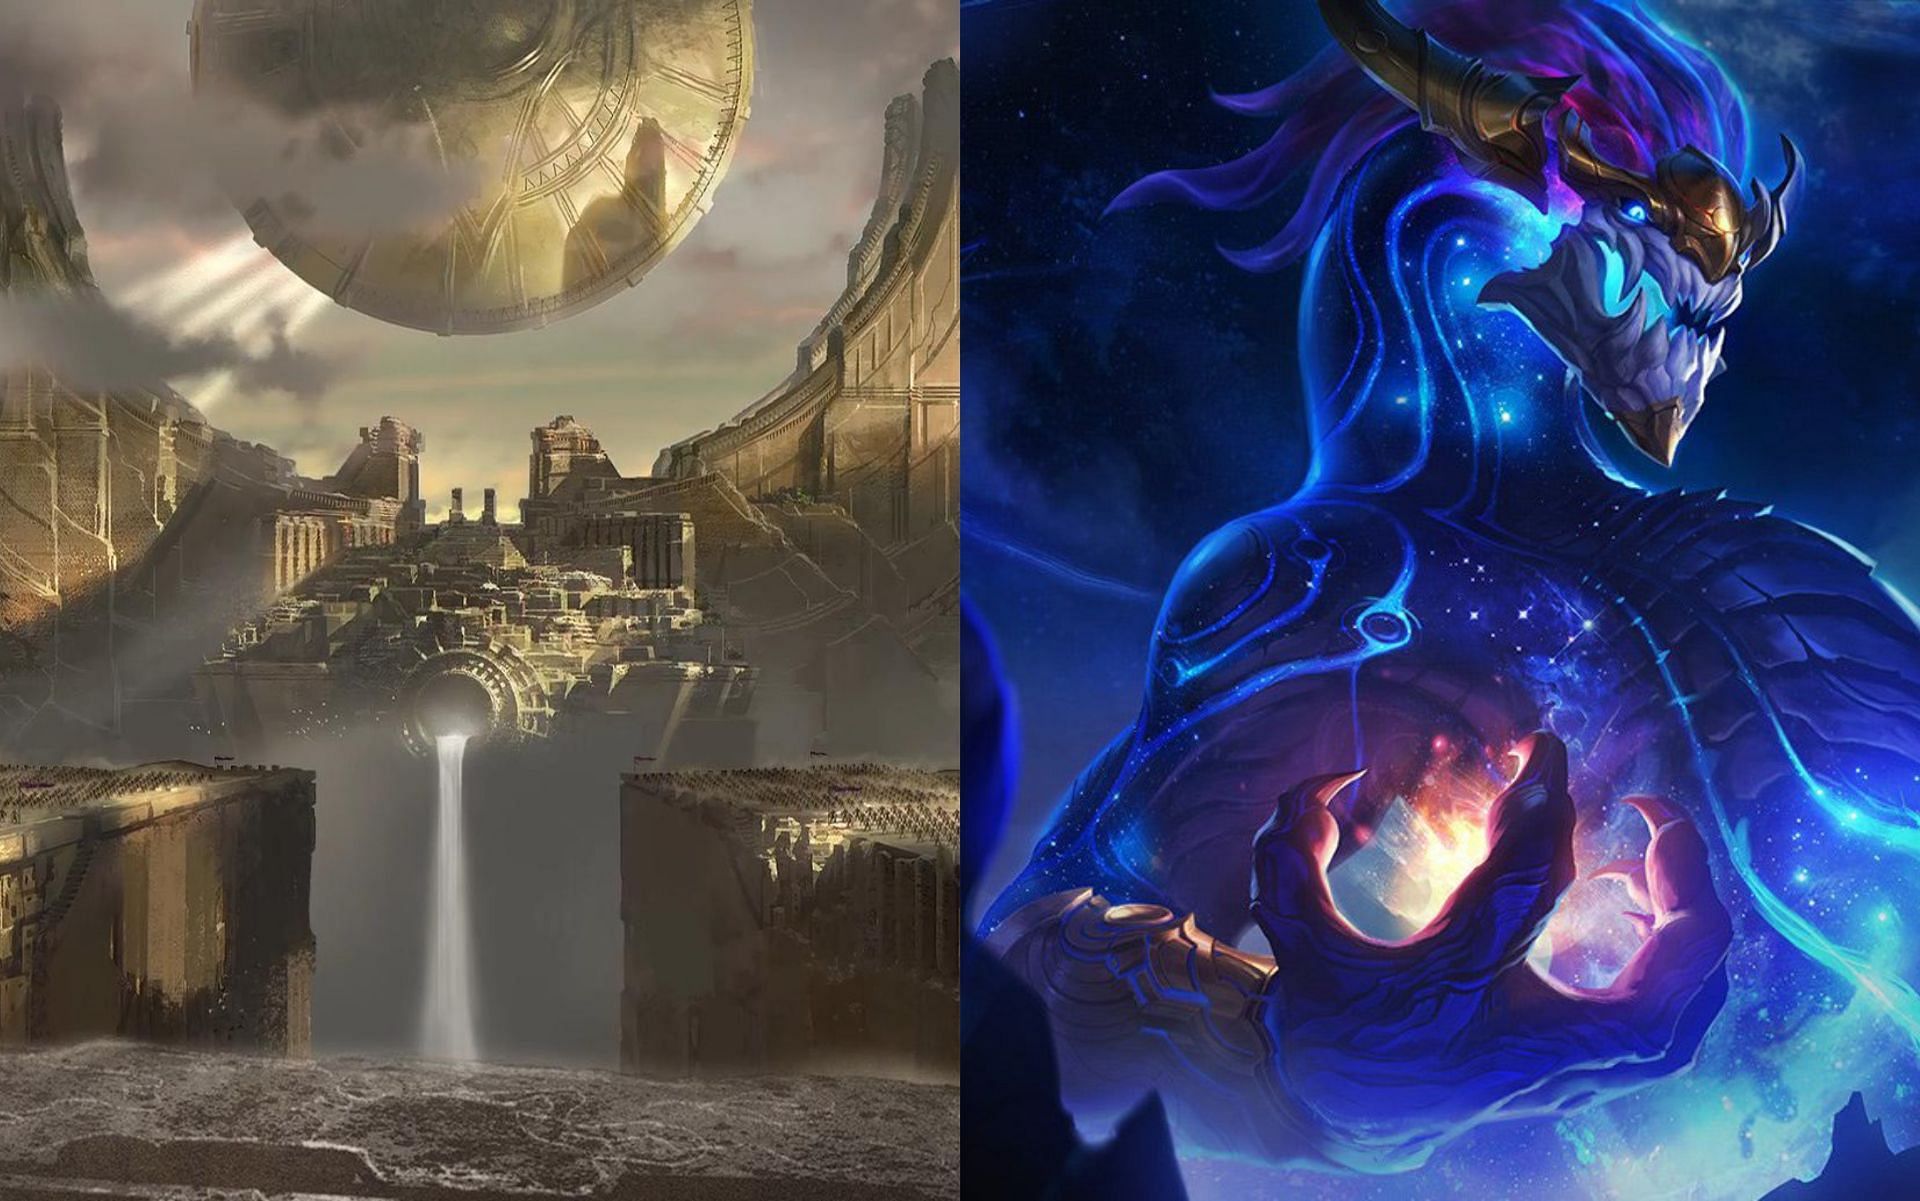 League of Legends Dev Team on X: Check out the latest Champion Roadmap! ⚡    / X